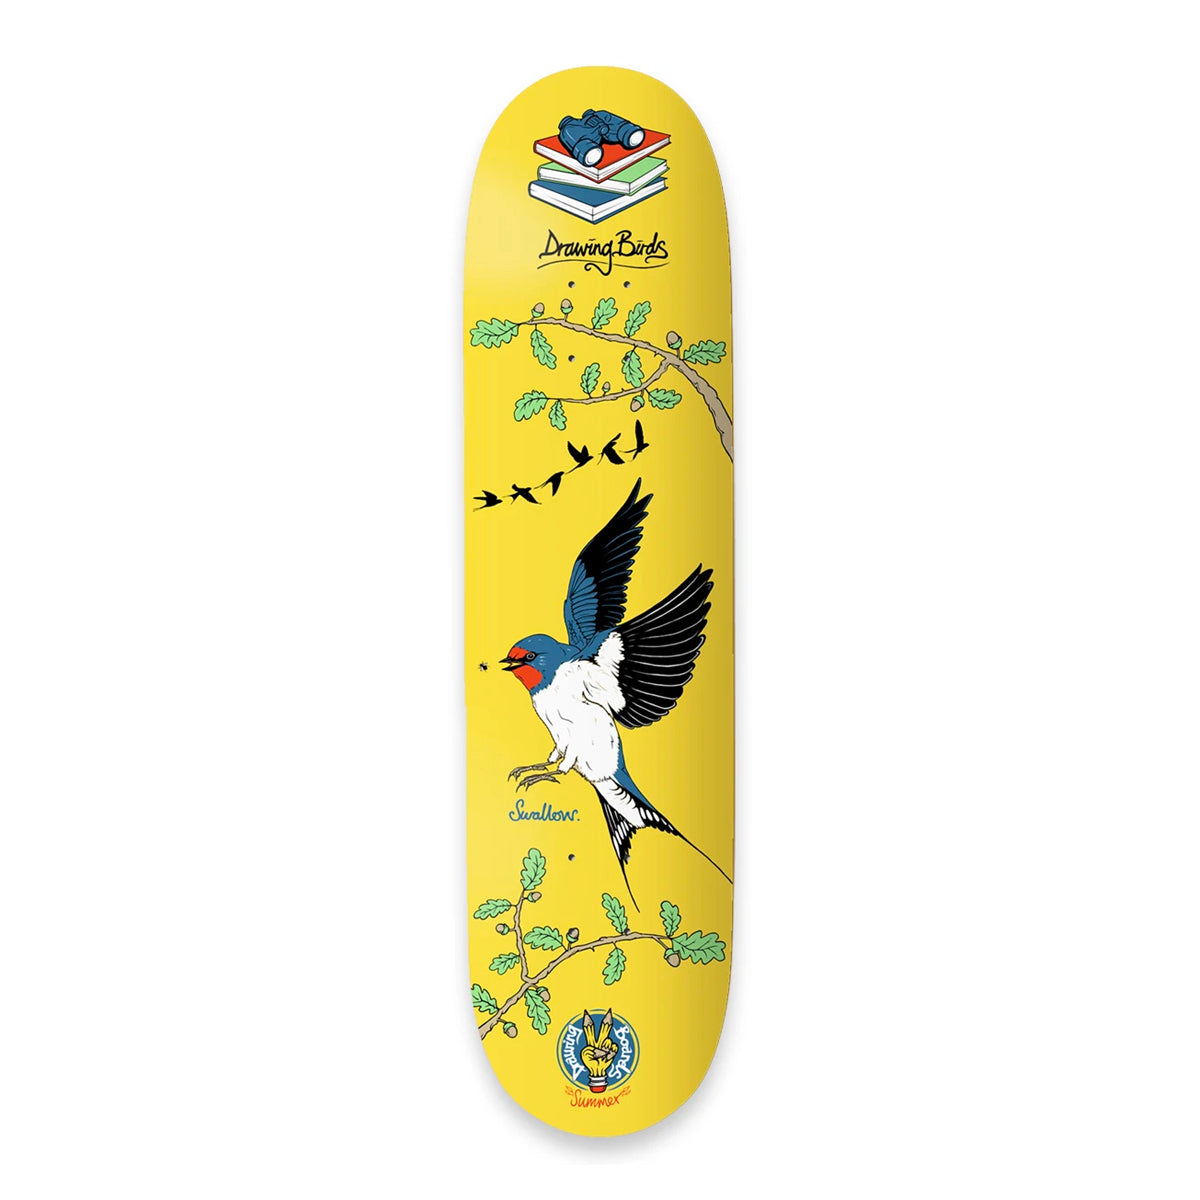 The Drawing Boards - 8.1" - Seasonal Birds - Swallow Deck - Prime Delux Store